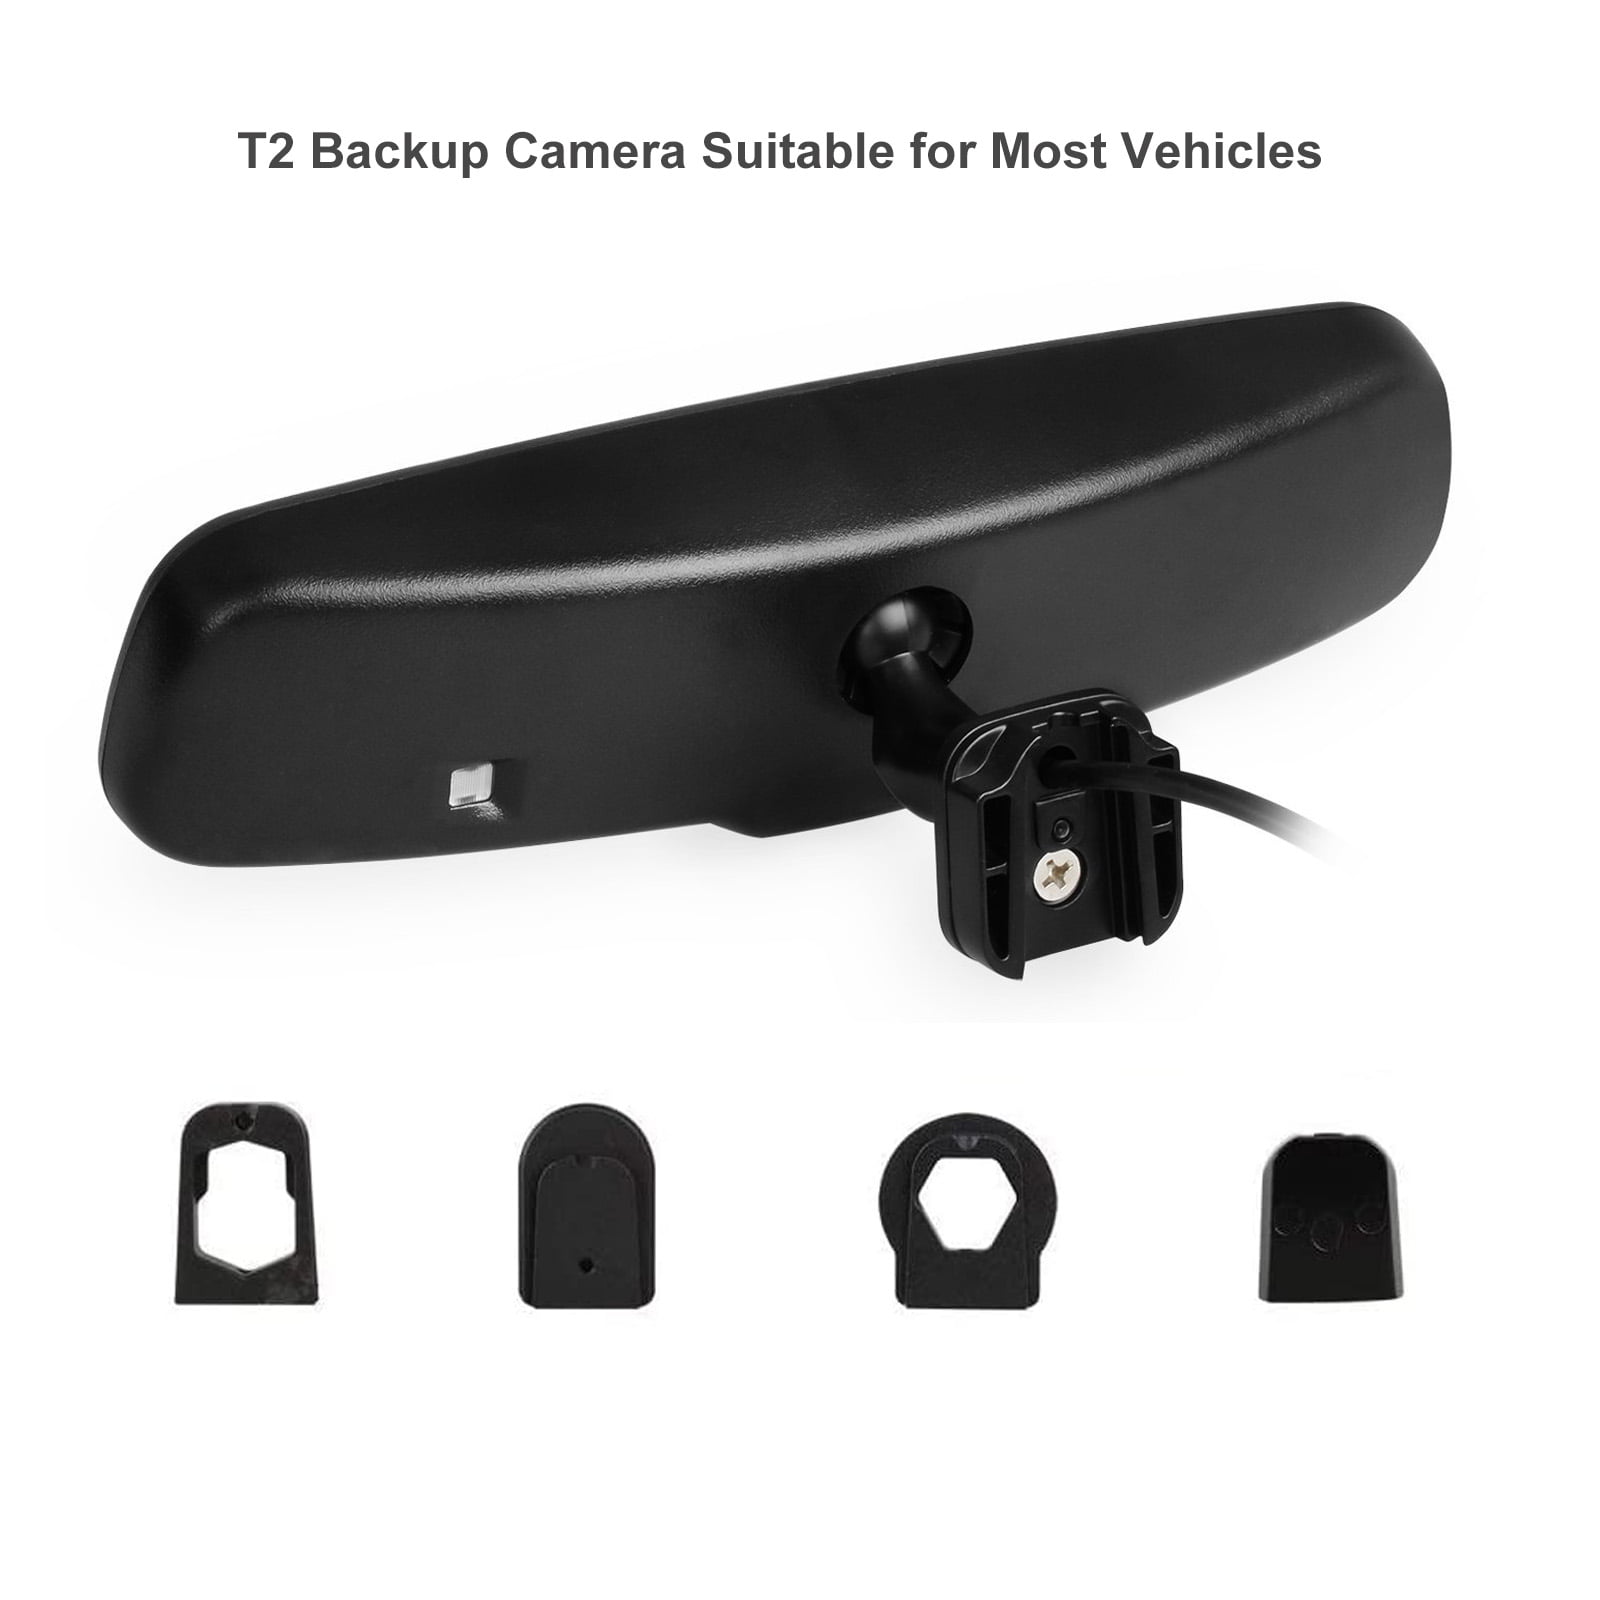 AUTO-VOX W7 Backup Camera: Don't Throw Out Your Rear-View Mirror